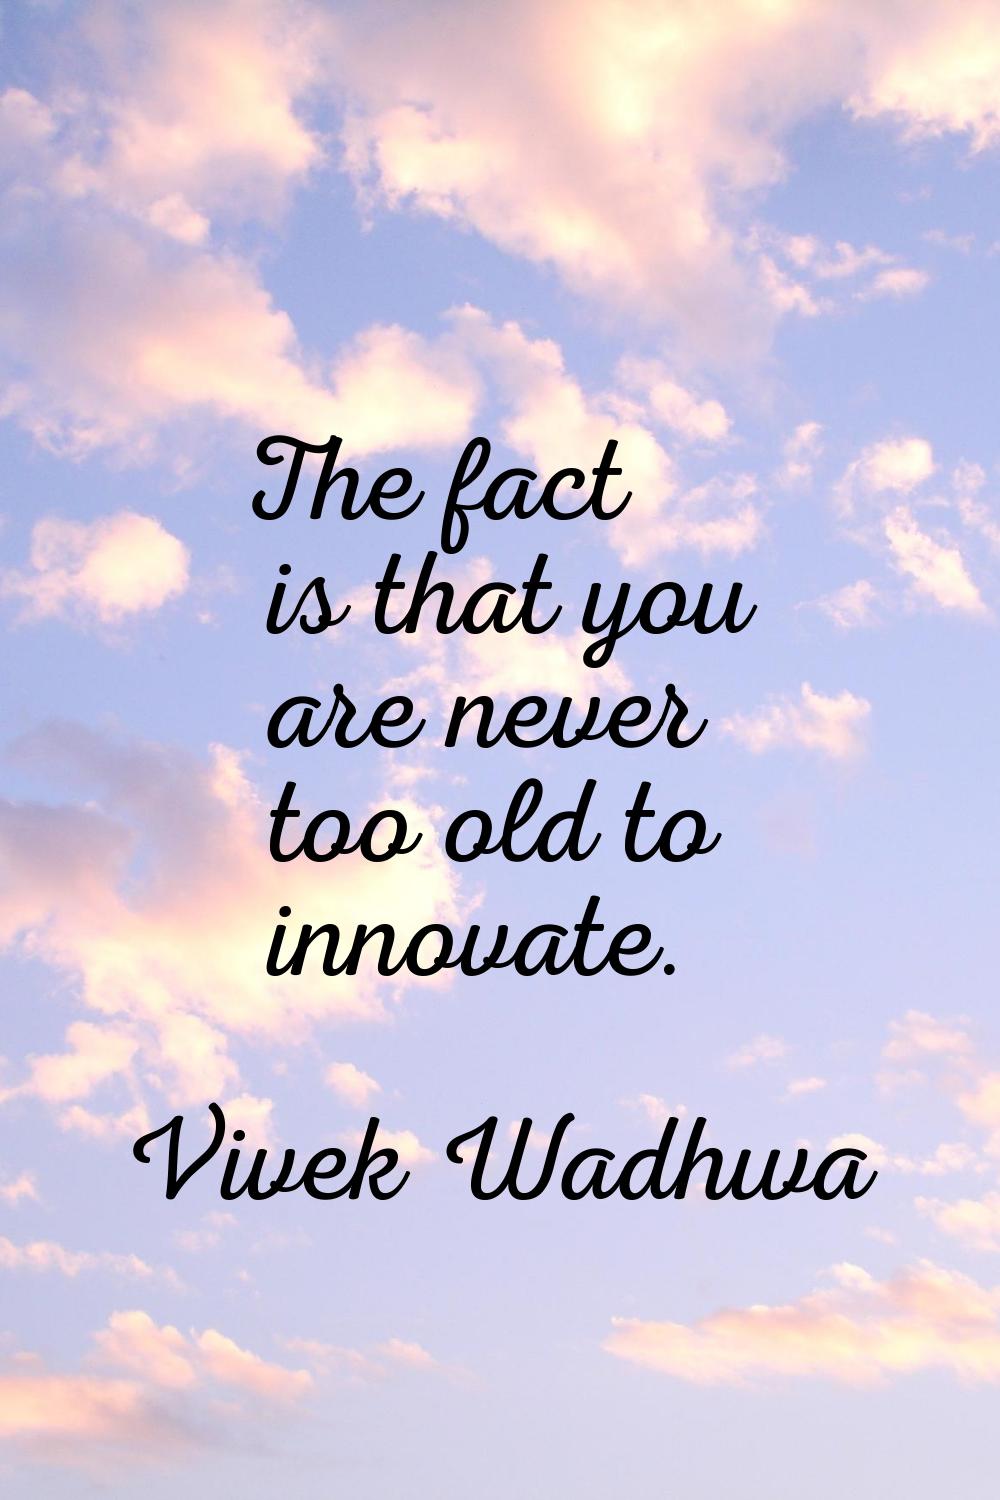 The fact is that you are never too old to innovate.